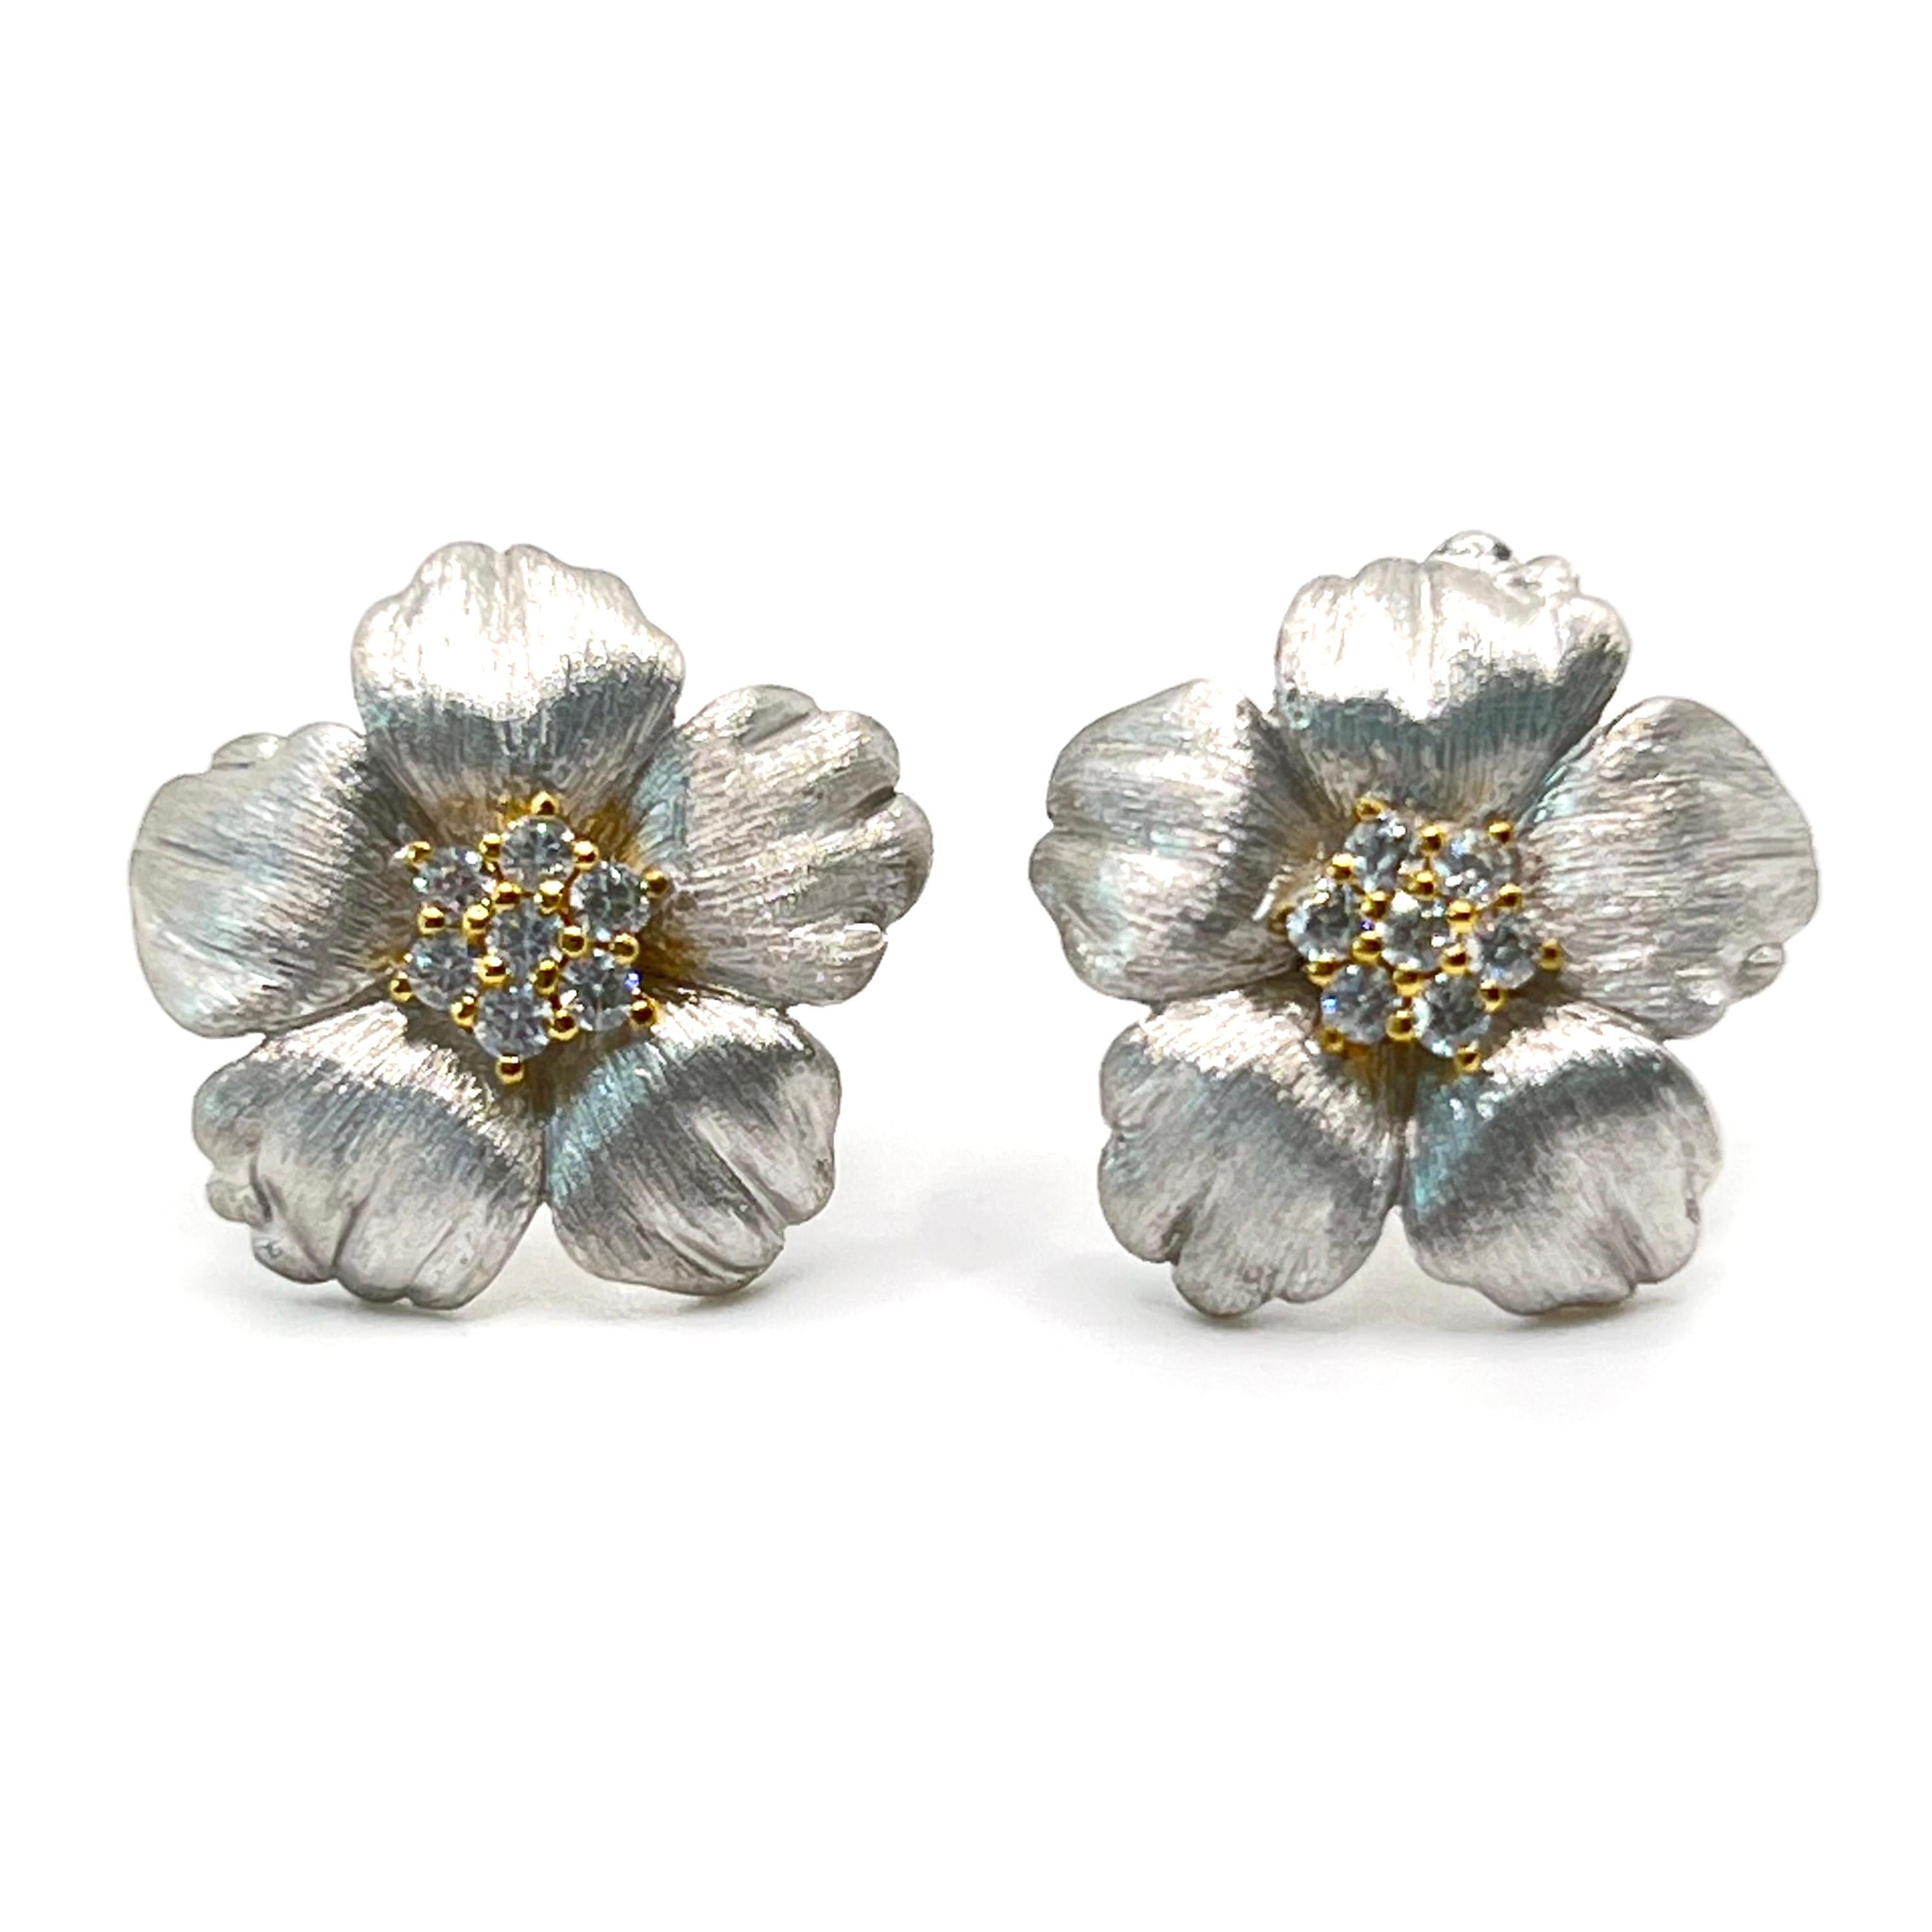 Elegant 18mm Five Petal Flower Two-tone Sterling Silver Earrings

This stunning pair of earrings features intricate design three dimension five petal flower, adorned with round simulated diamond cz, handset in two-tone platinum rhodium and 18k